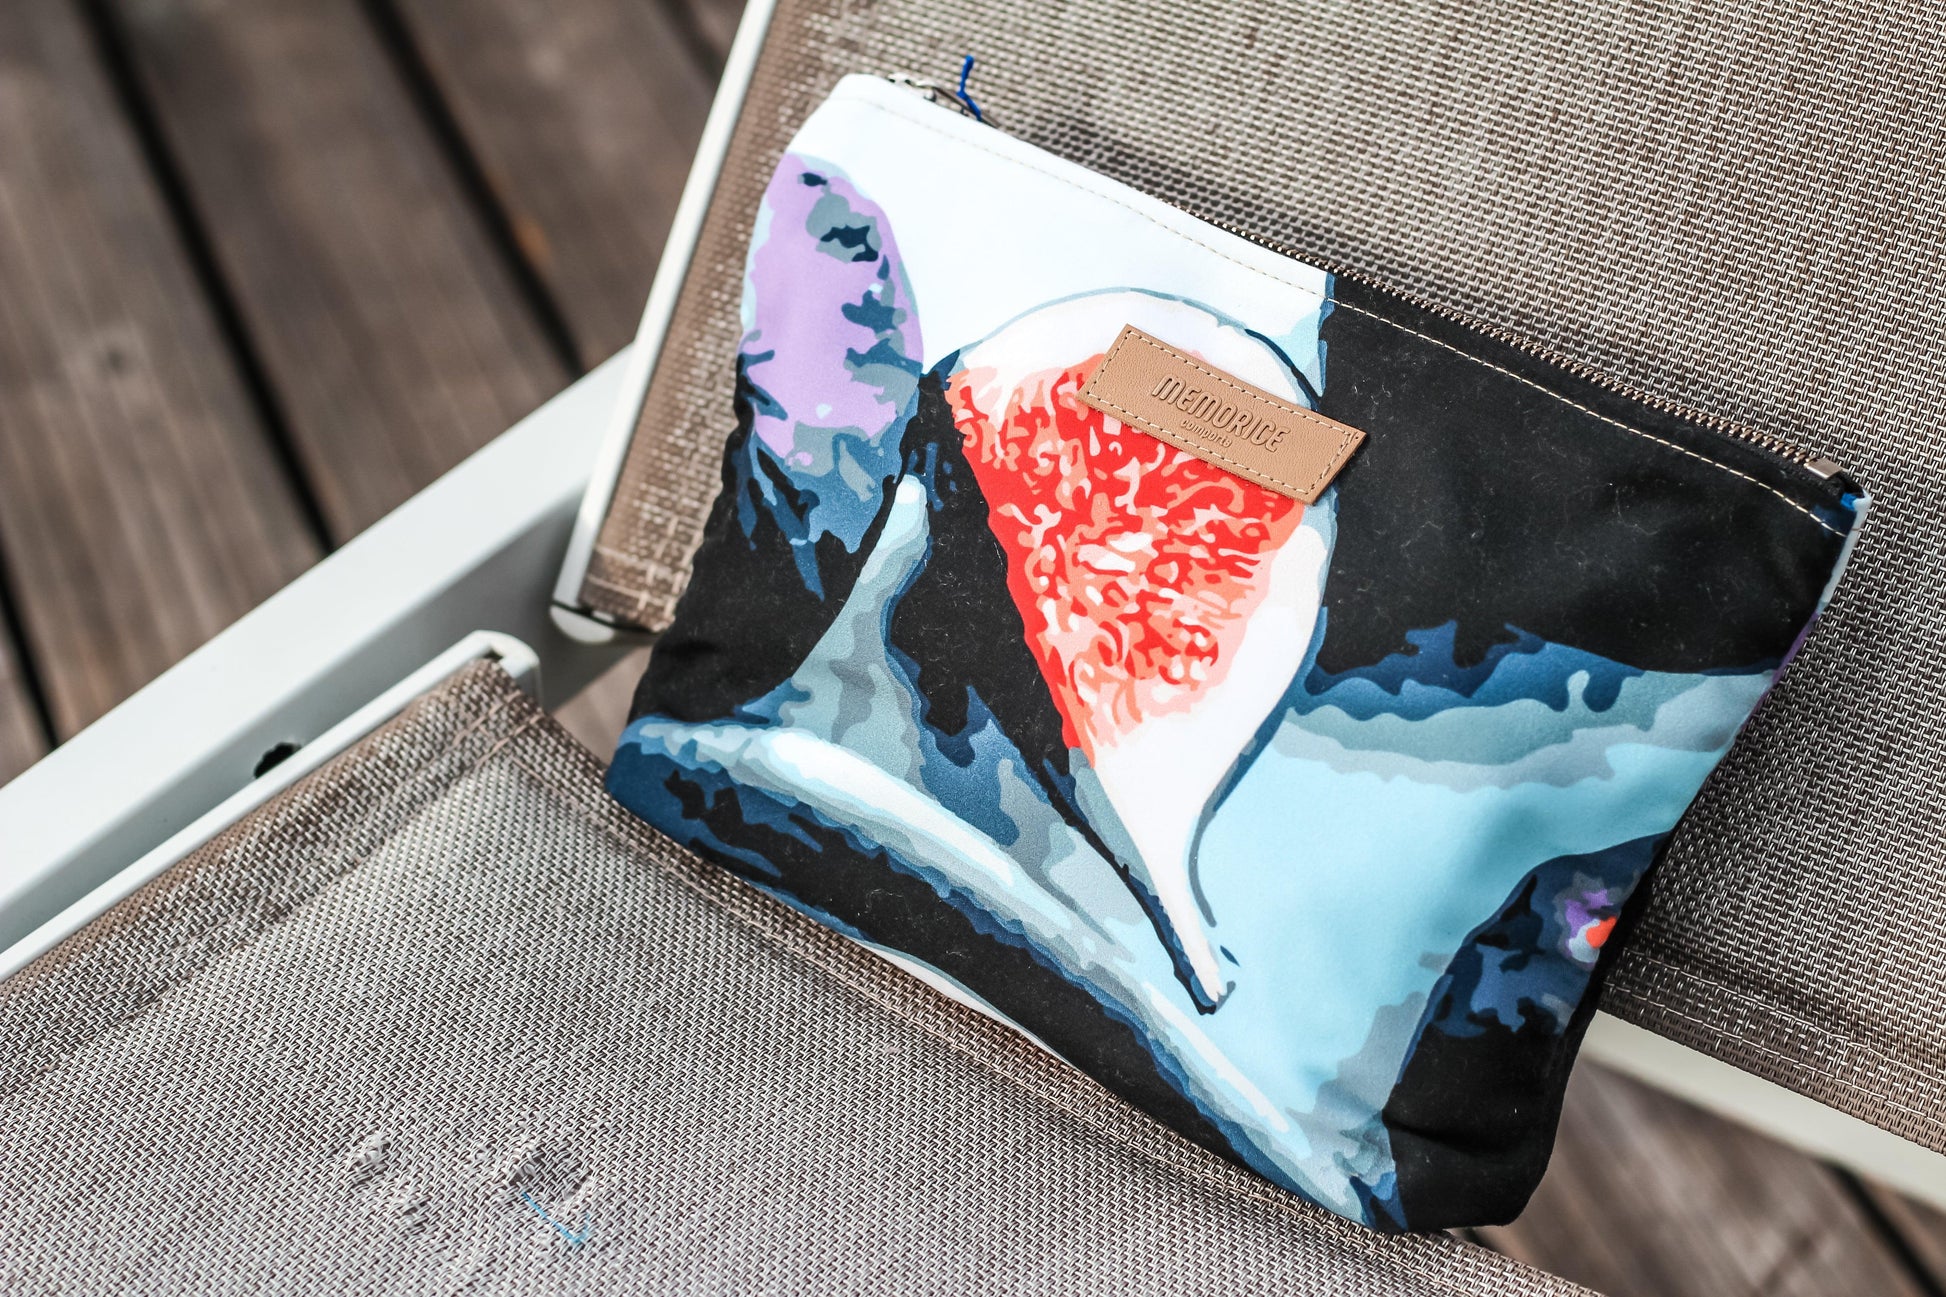 Colmo Midi Pouch | POUCH | Iberica - Pretty things from Portugal